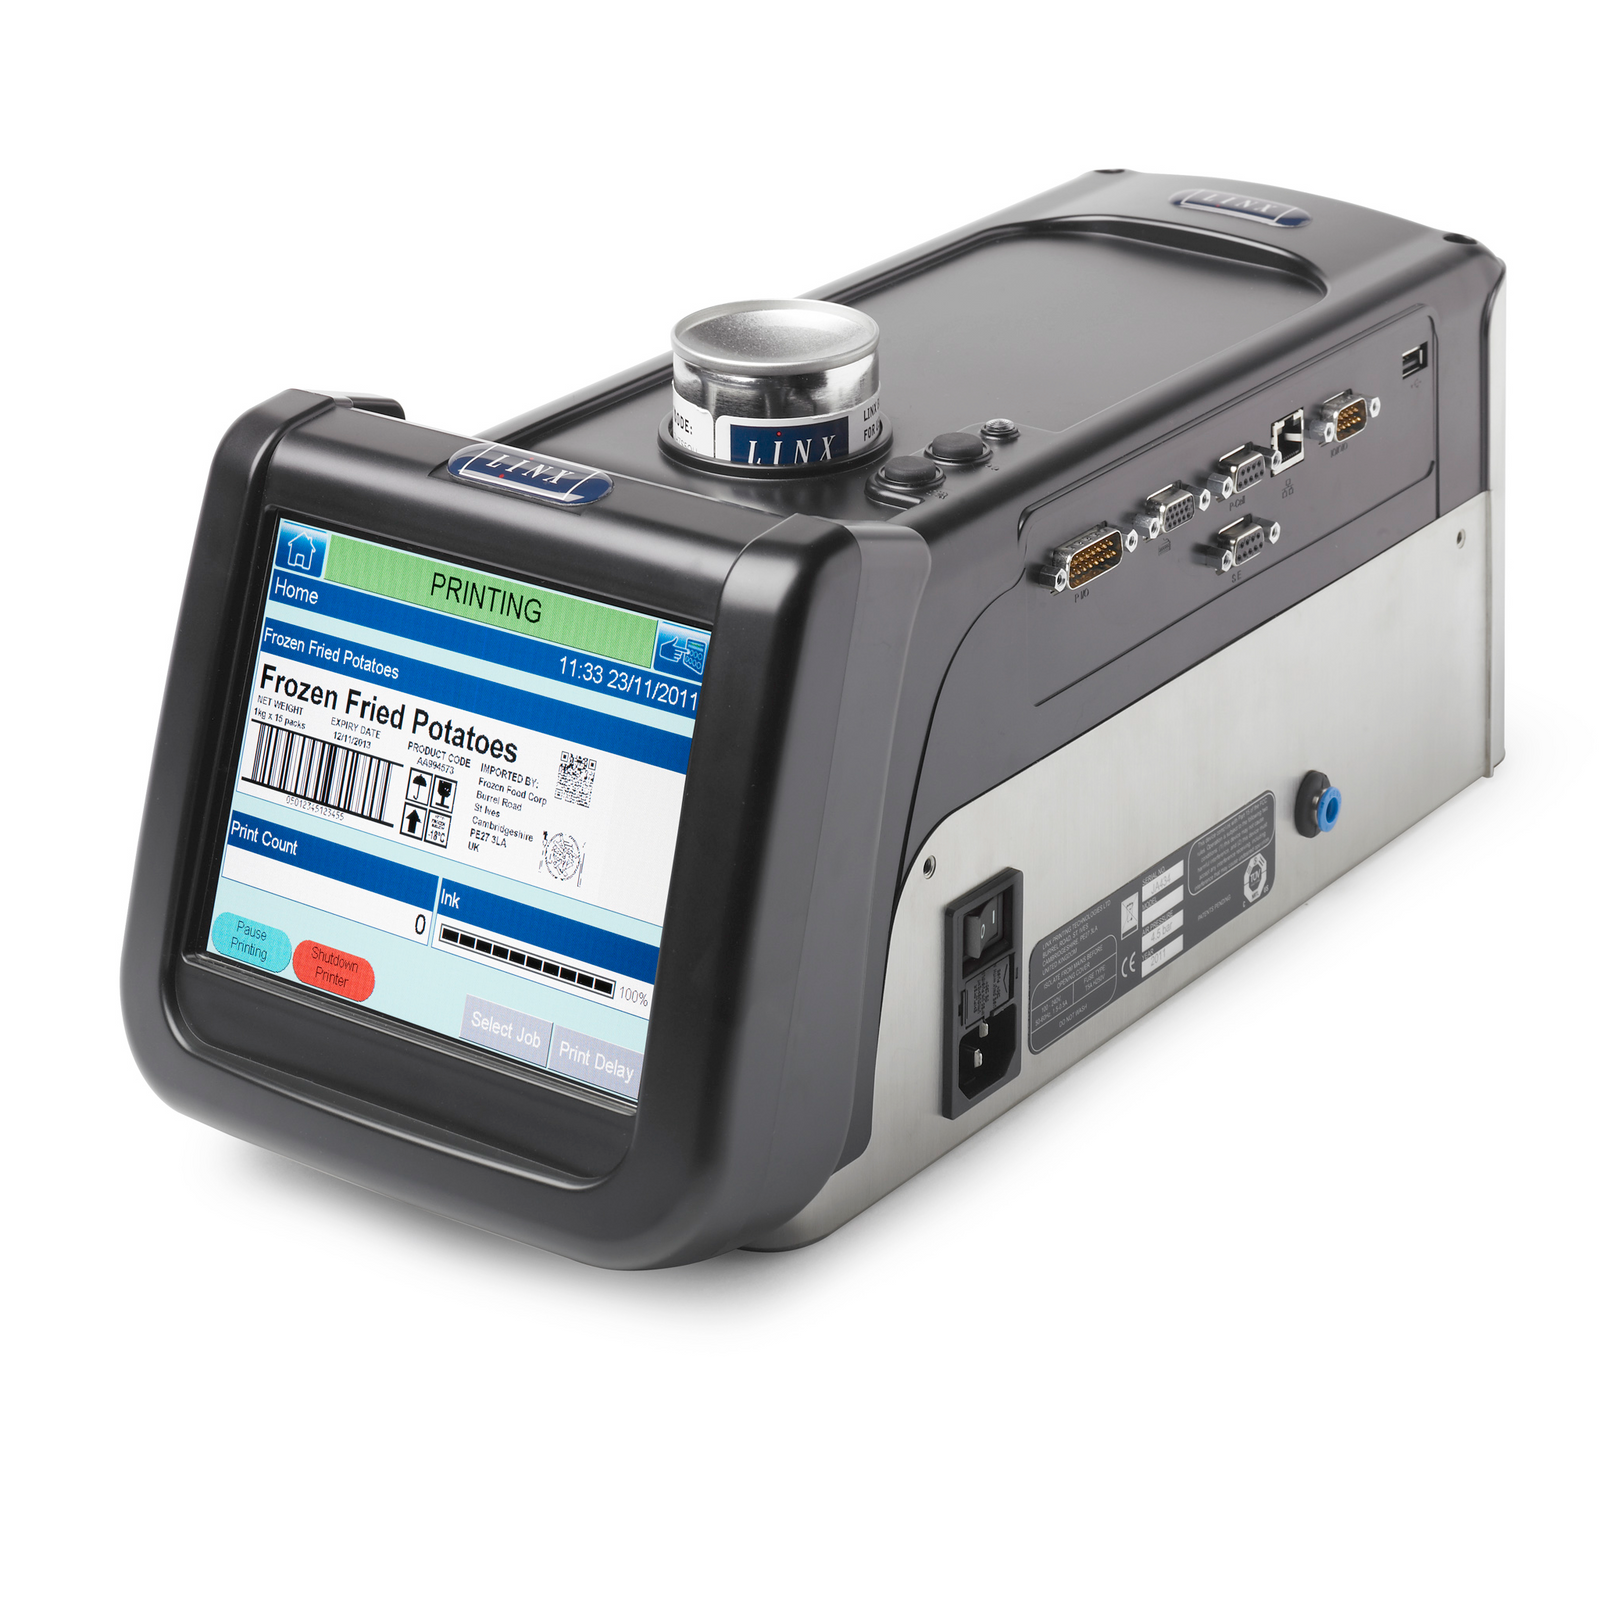 LINX IJ375 inkjet case coder for hi resolution barcodes, letters and numbers with touchscreen control panel